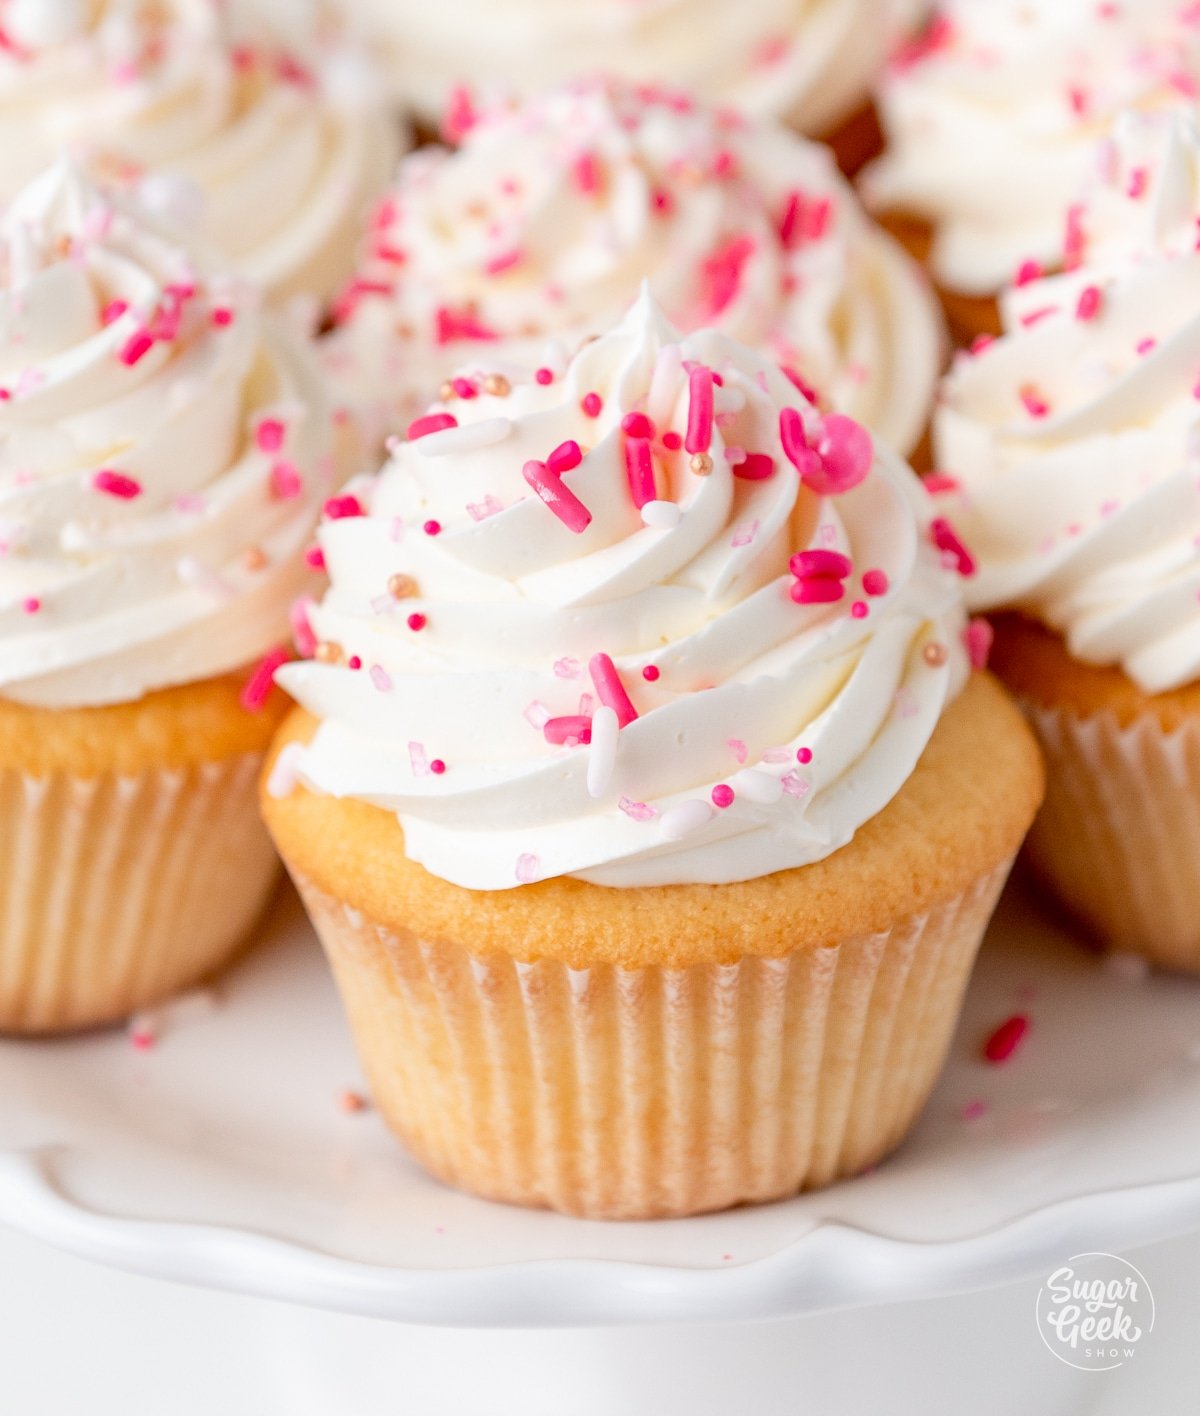 plate of finished vanilla cupcakes with pink sprinkles.